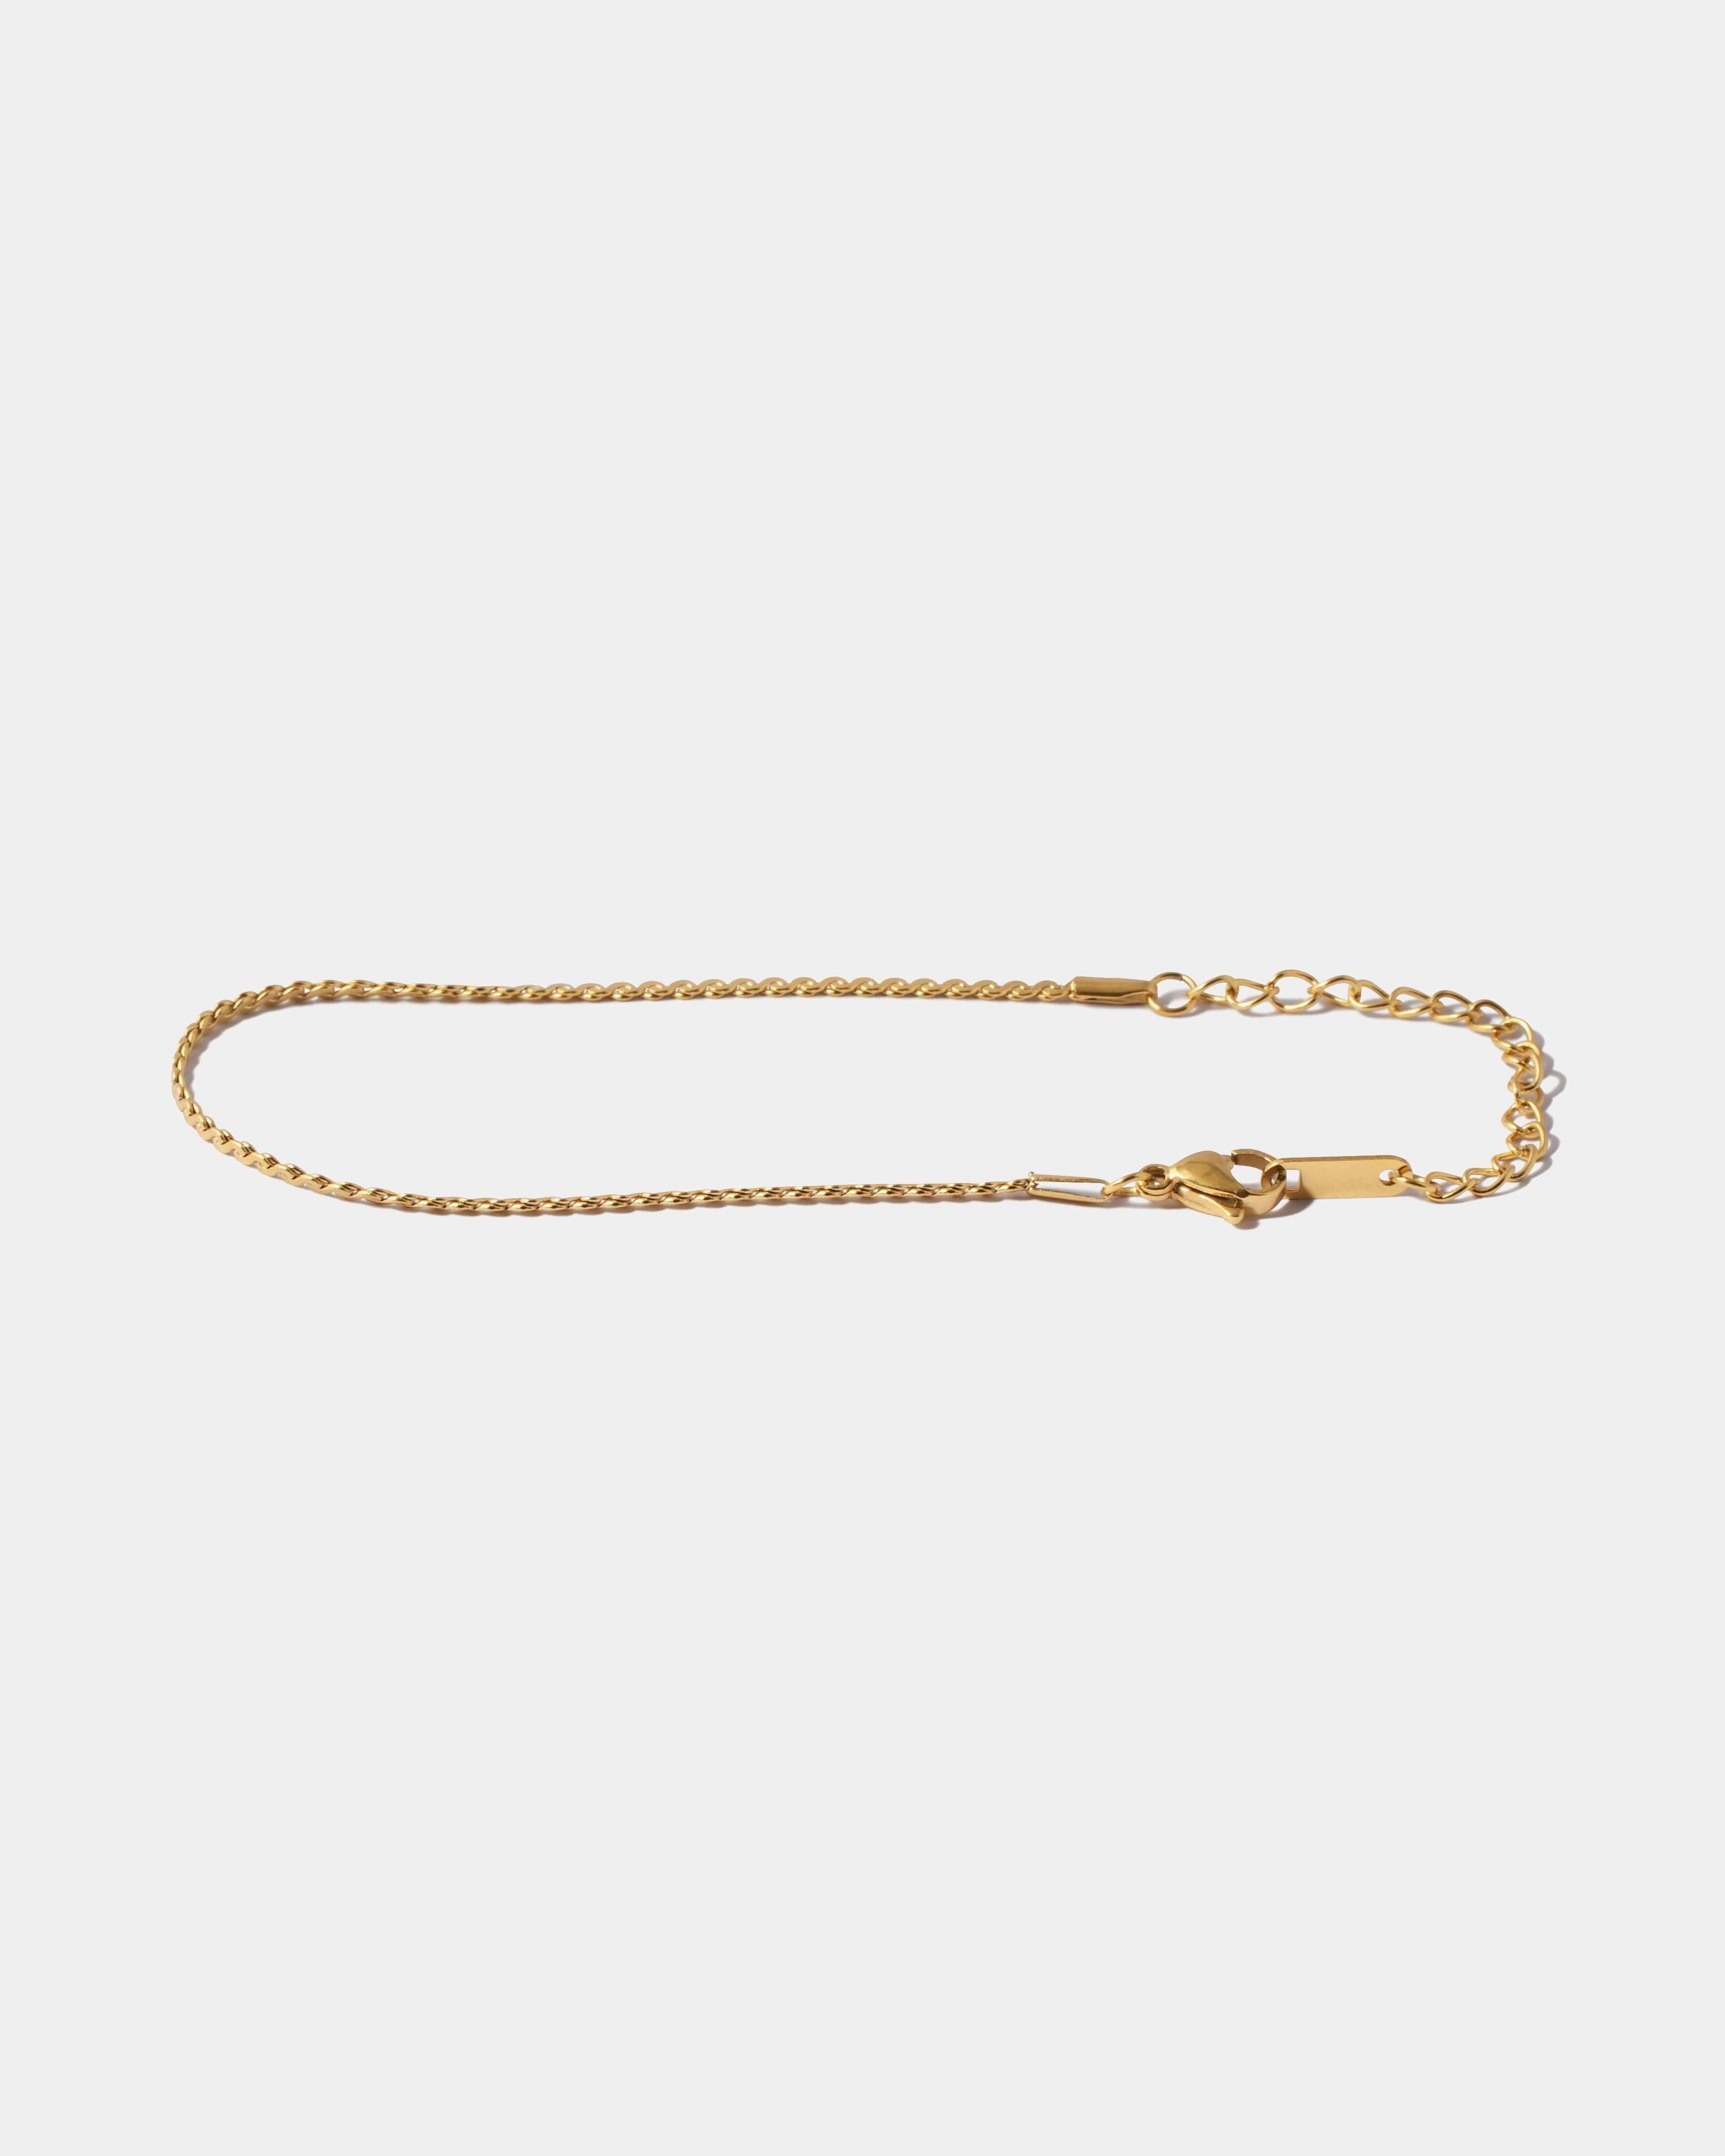 ROPE CHAIN BRACELET - LIMELY